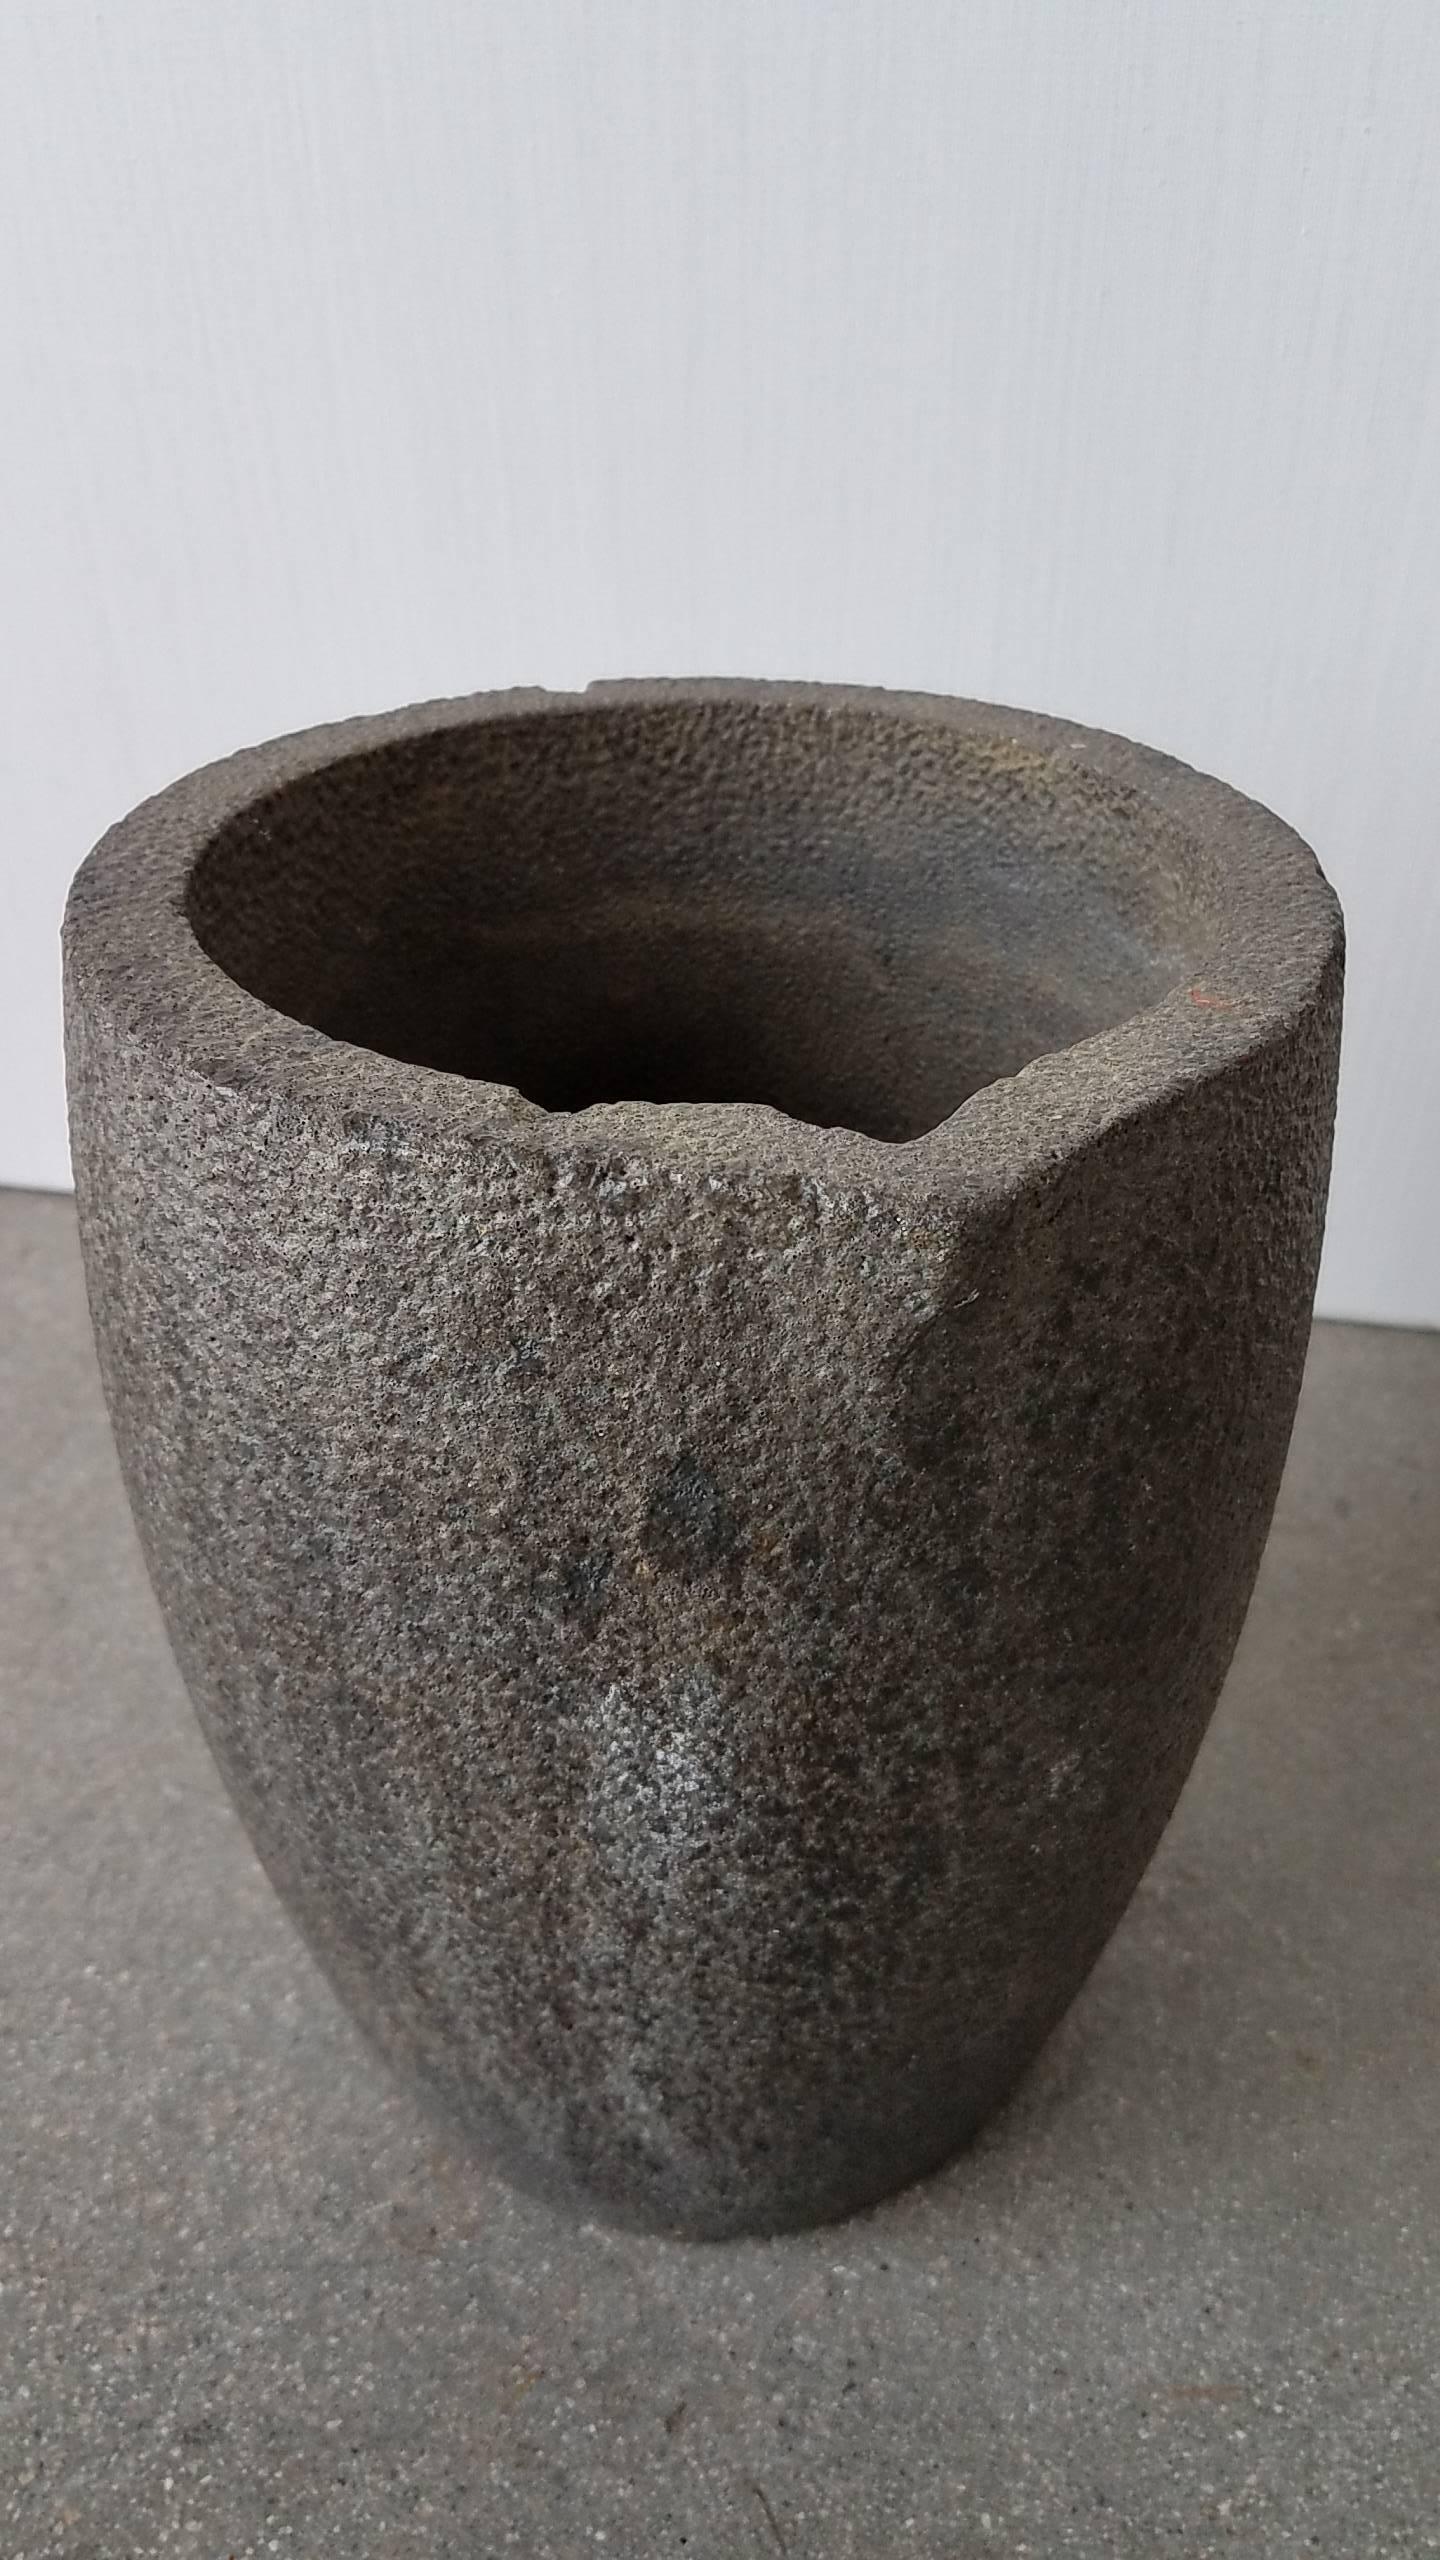 Foundry pot in perfect condition and would make a great vase for the garden.  Heavy iron with wonderful clean texture.